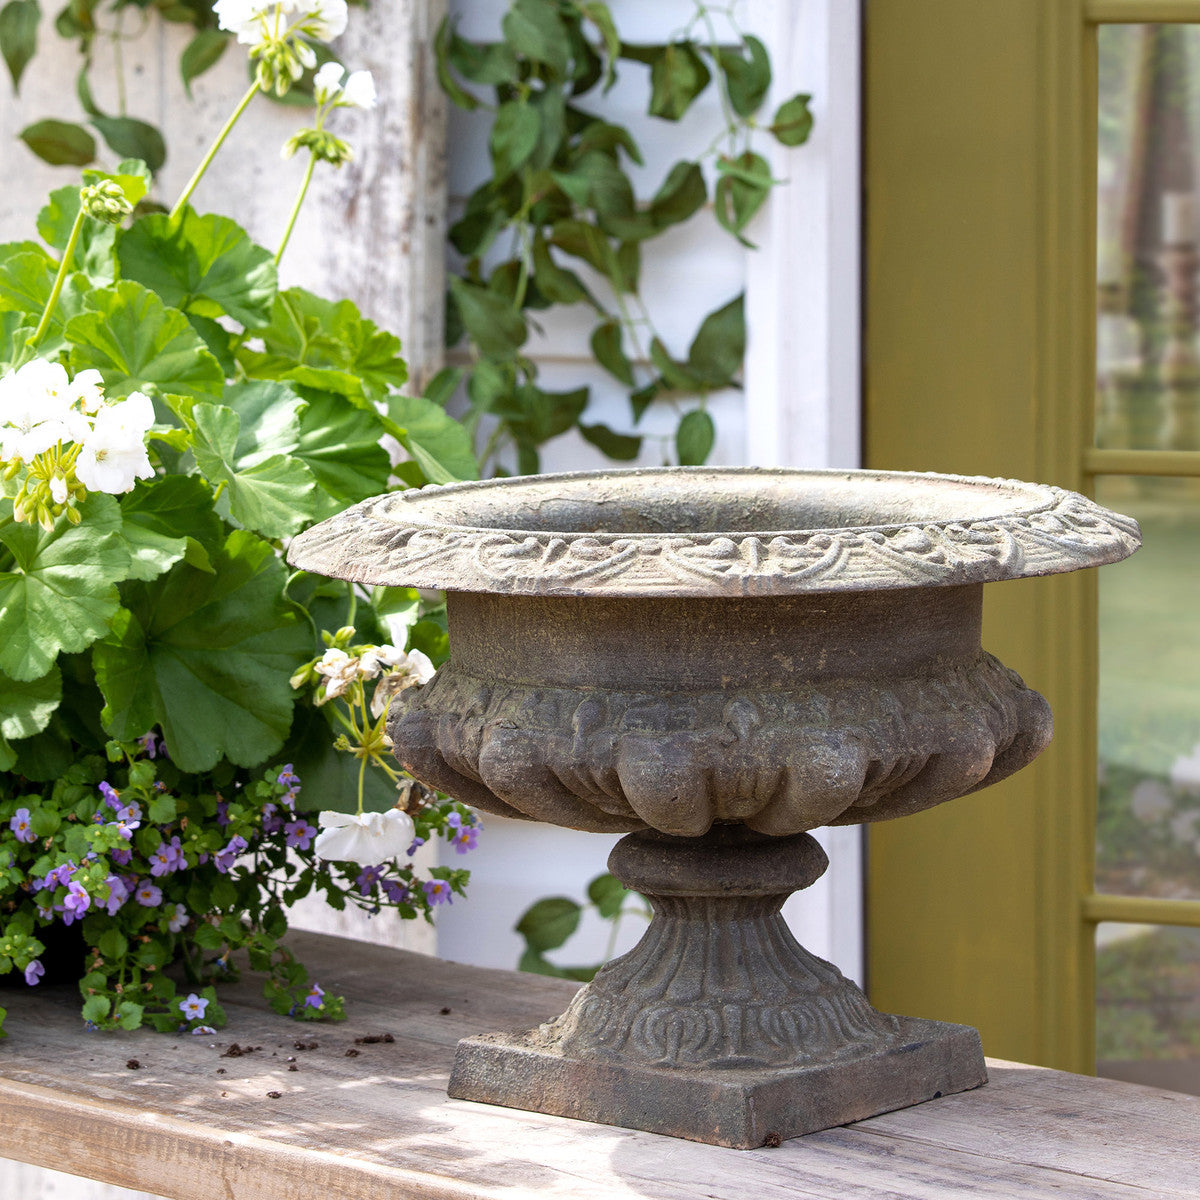 Restoration Hardware Iron Urns for sale, The Alley Exchange Iron Planters for sale